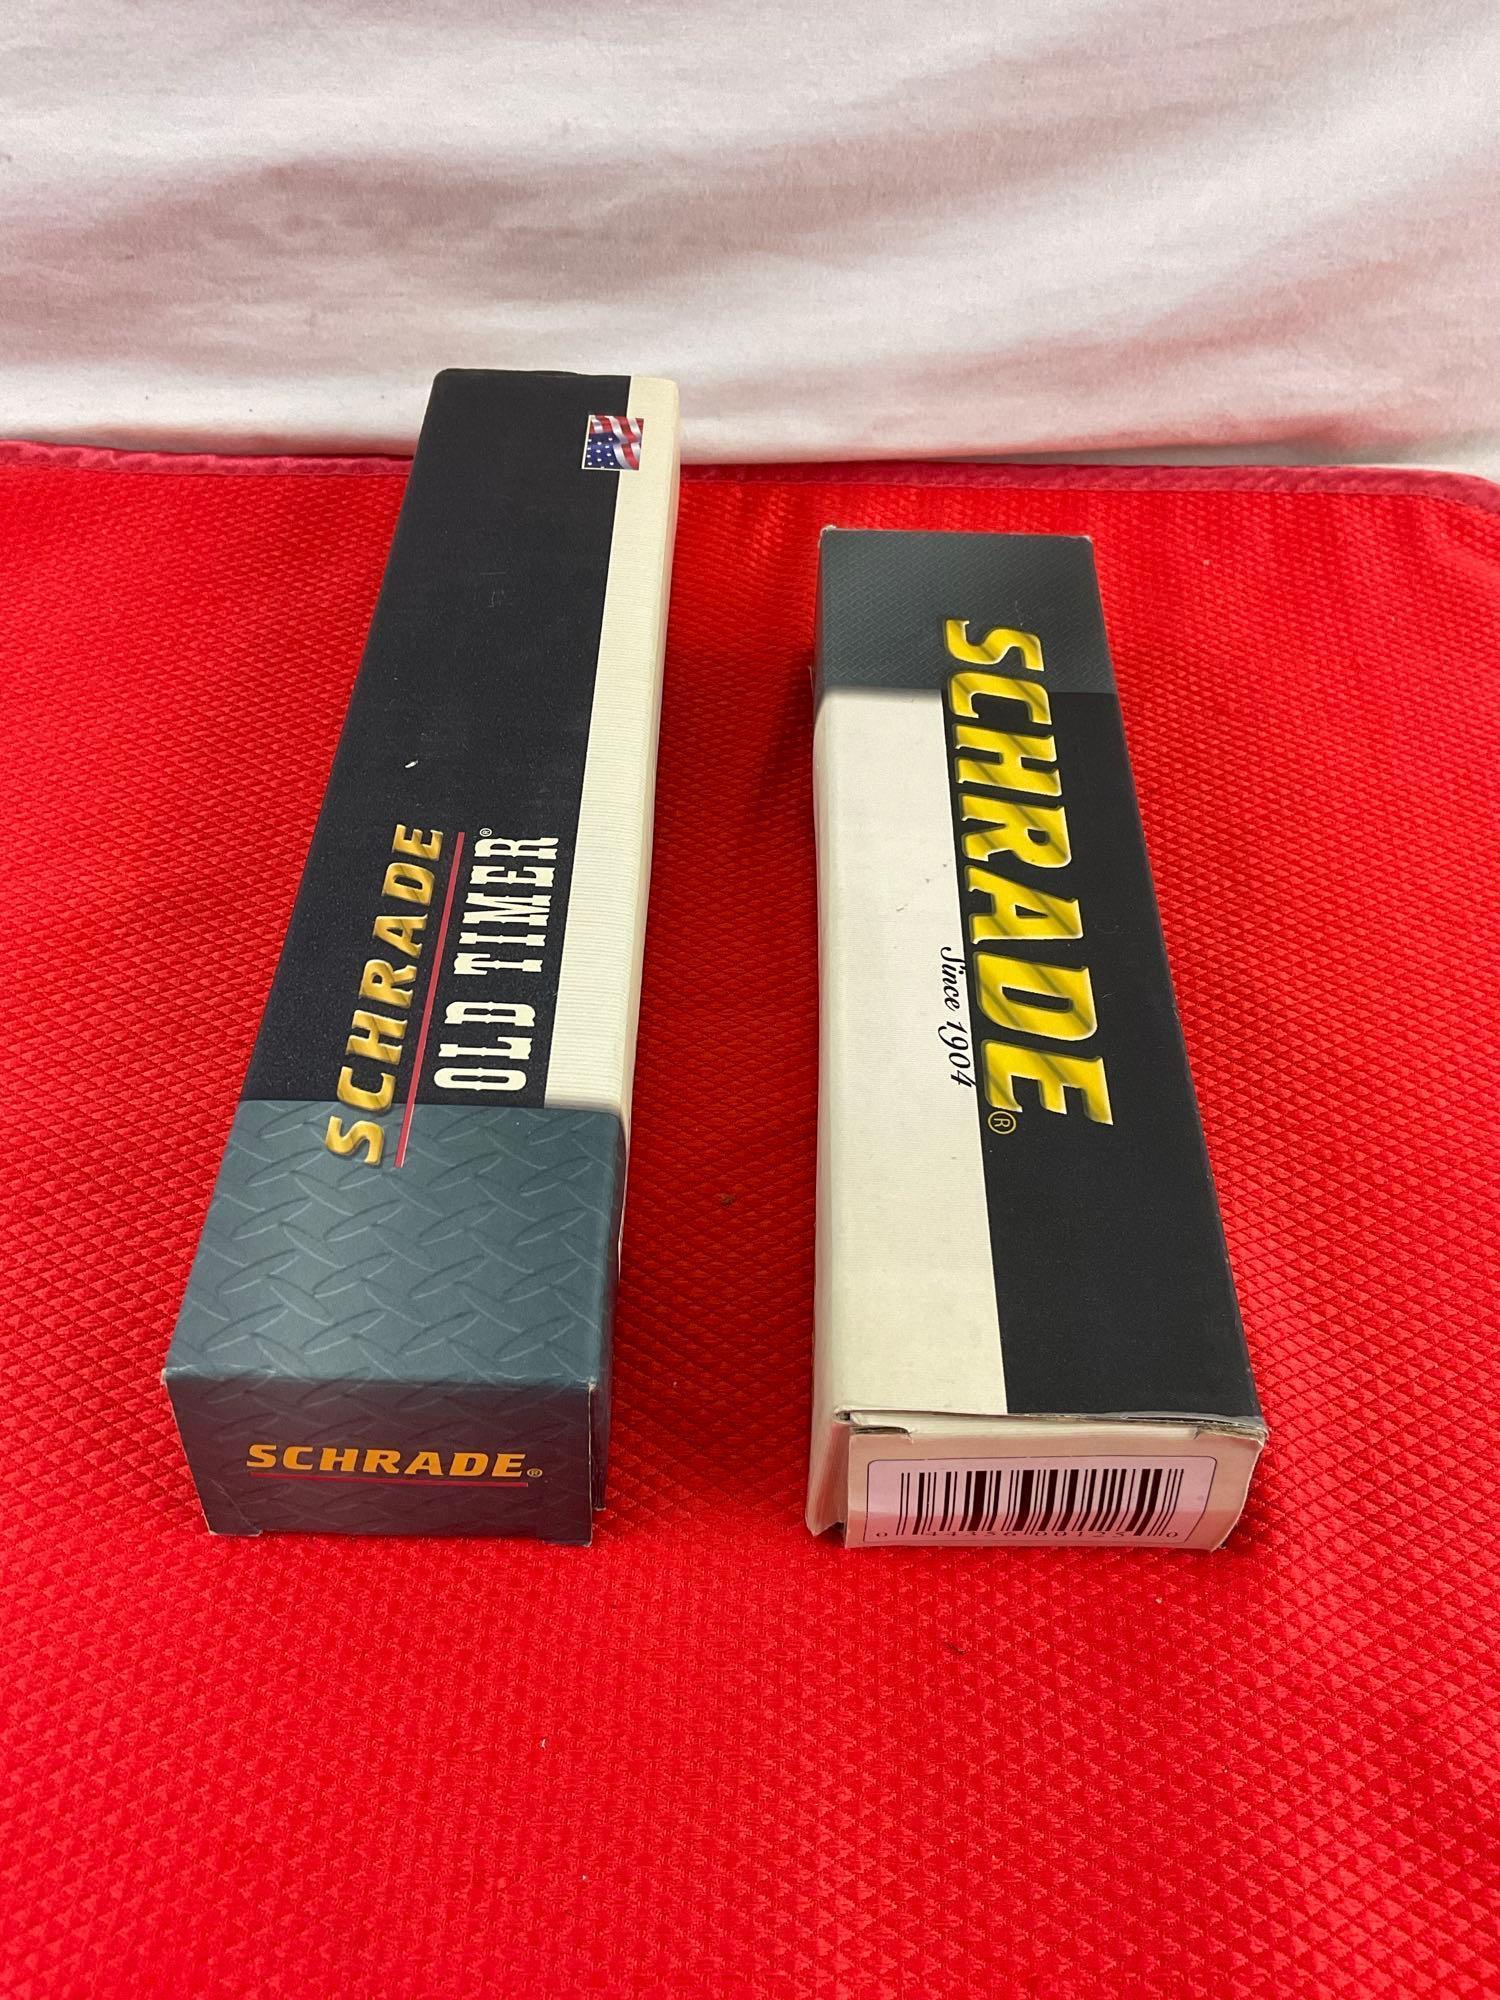 2 pcs Schrade Old Timer Stainless Steel Knives w/ Sheathes. Model No. 1420T & 1580T. NIB. See pics.